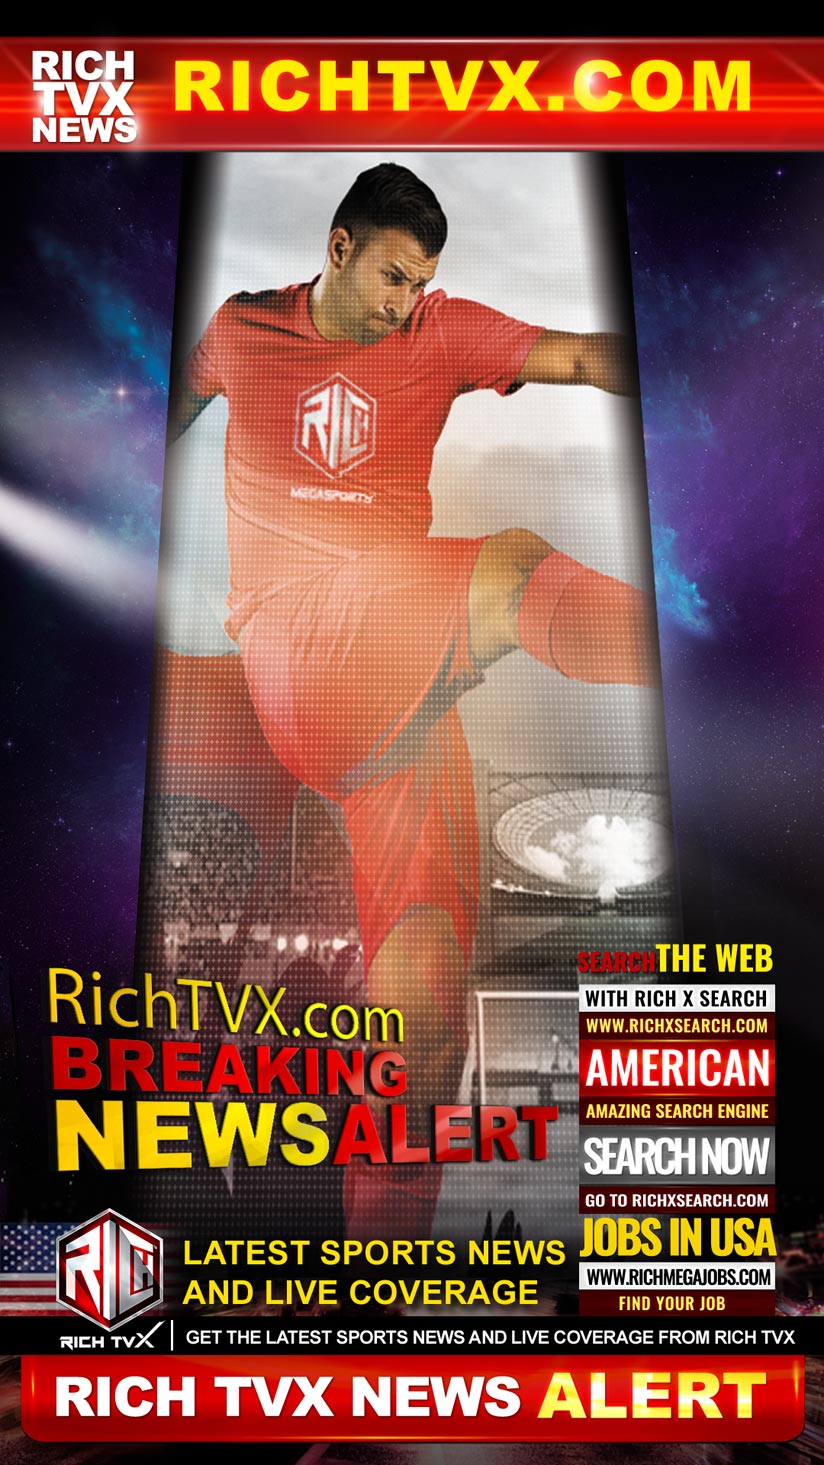 Rich TVX Sport | Latest Sports News, Scores, and Analysis